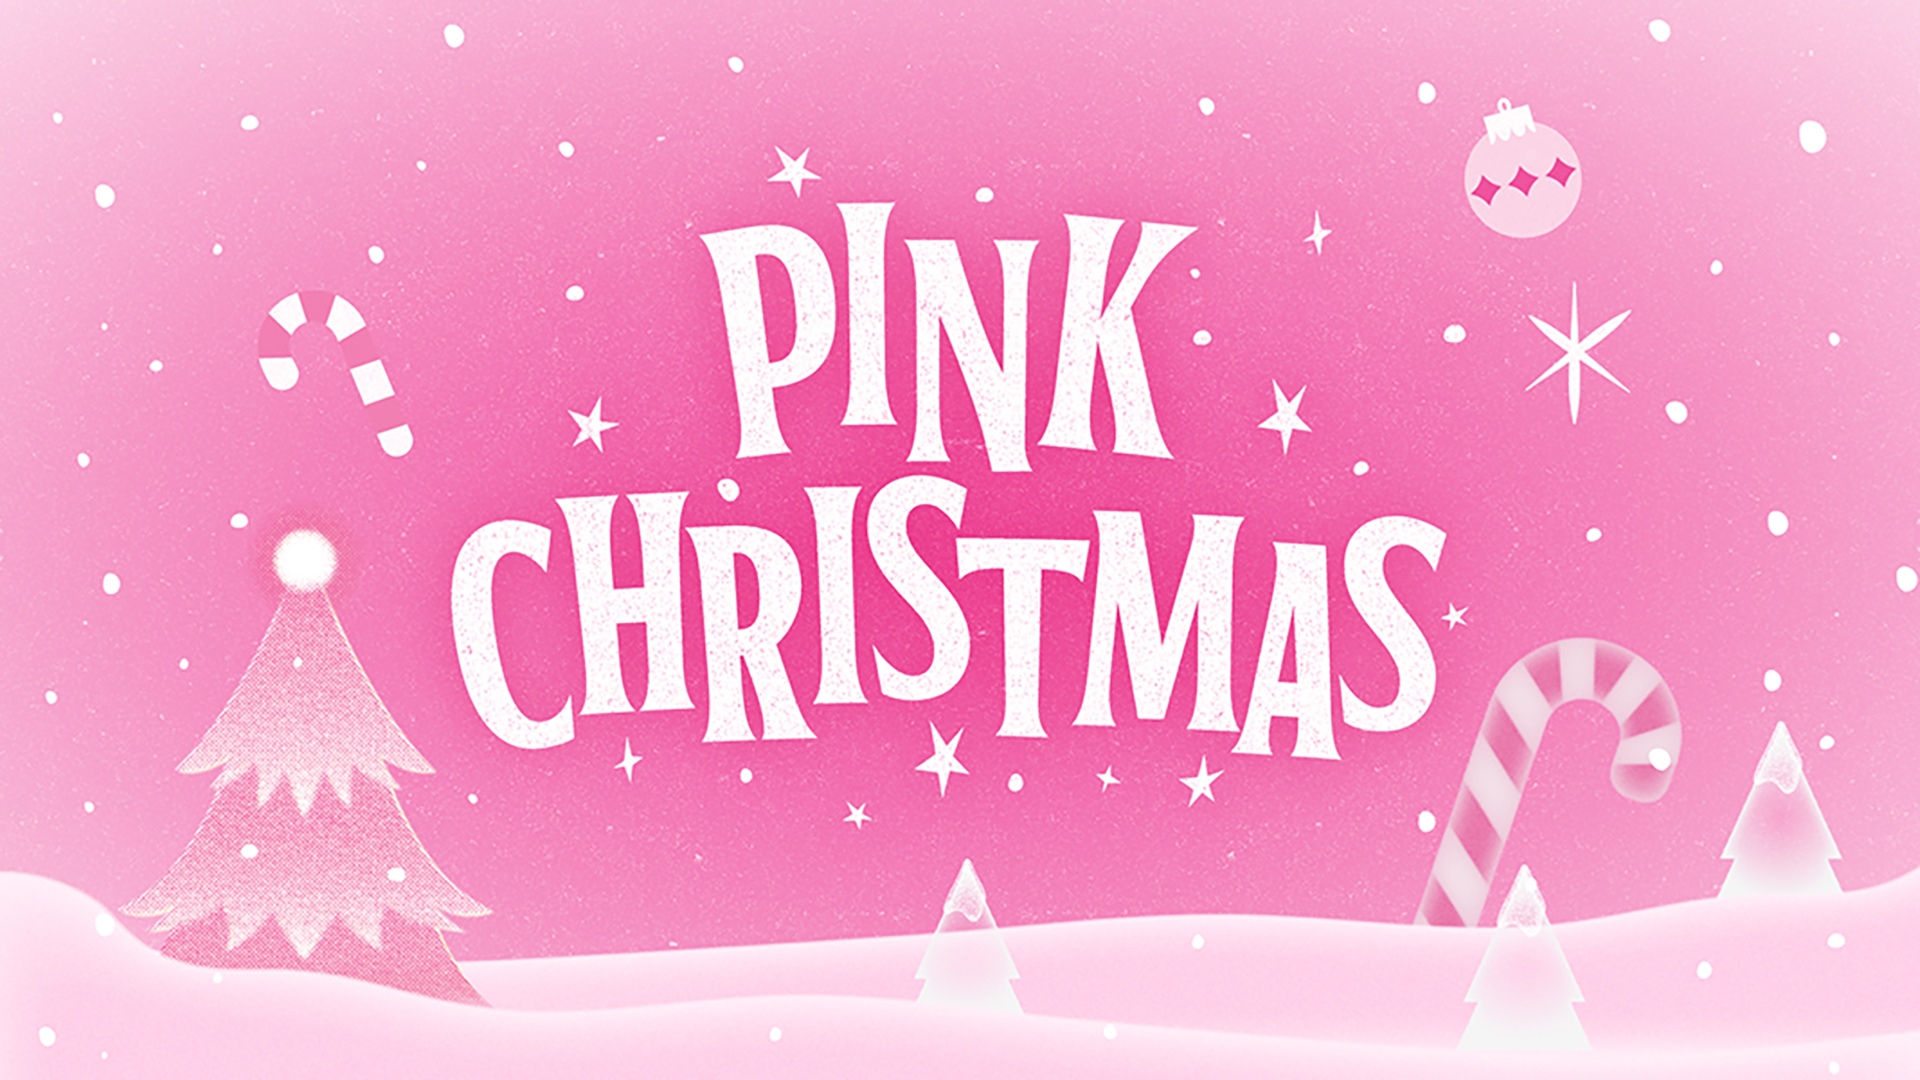 PINK CHRISTMAS LETTER from SHINee